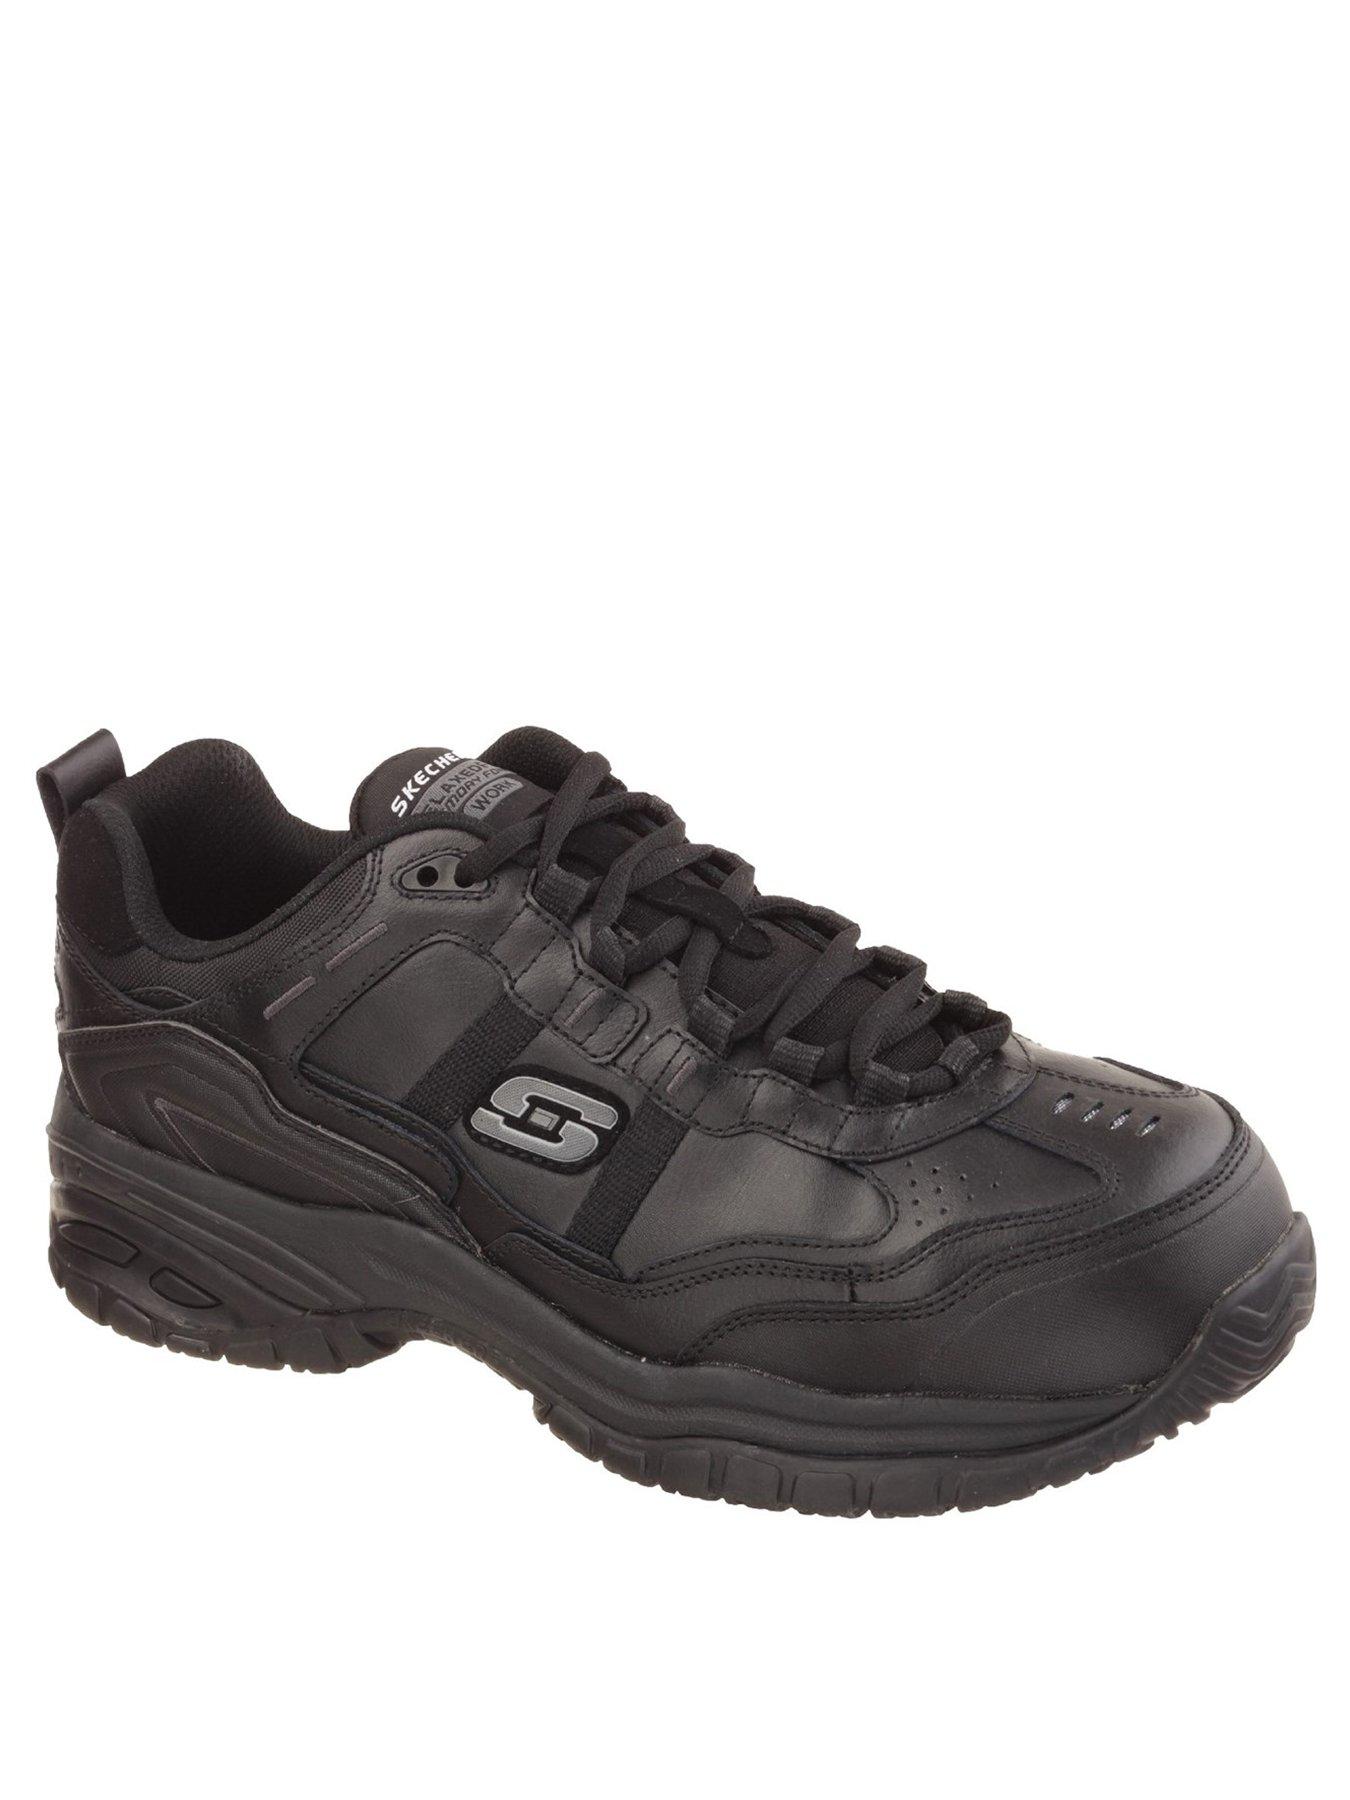 skechers work relaxed fit mens